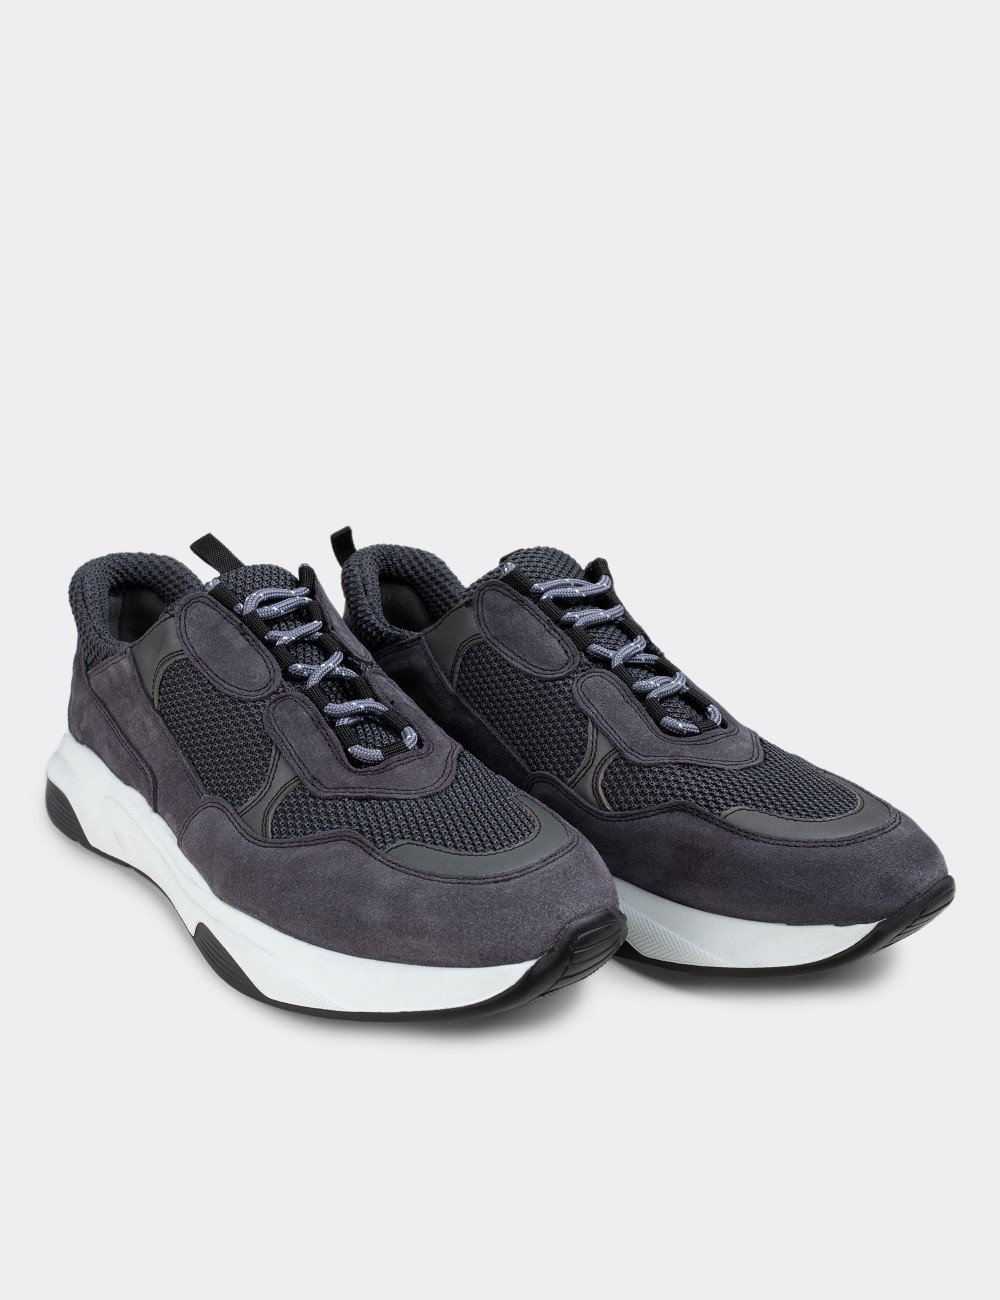 Gray Suede Leather Sneakers - 01724MGRIE02